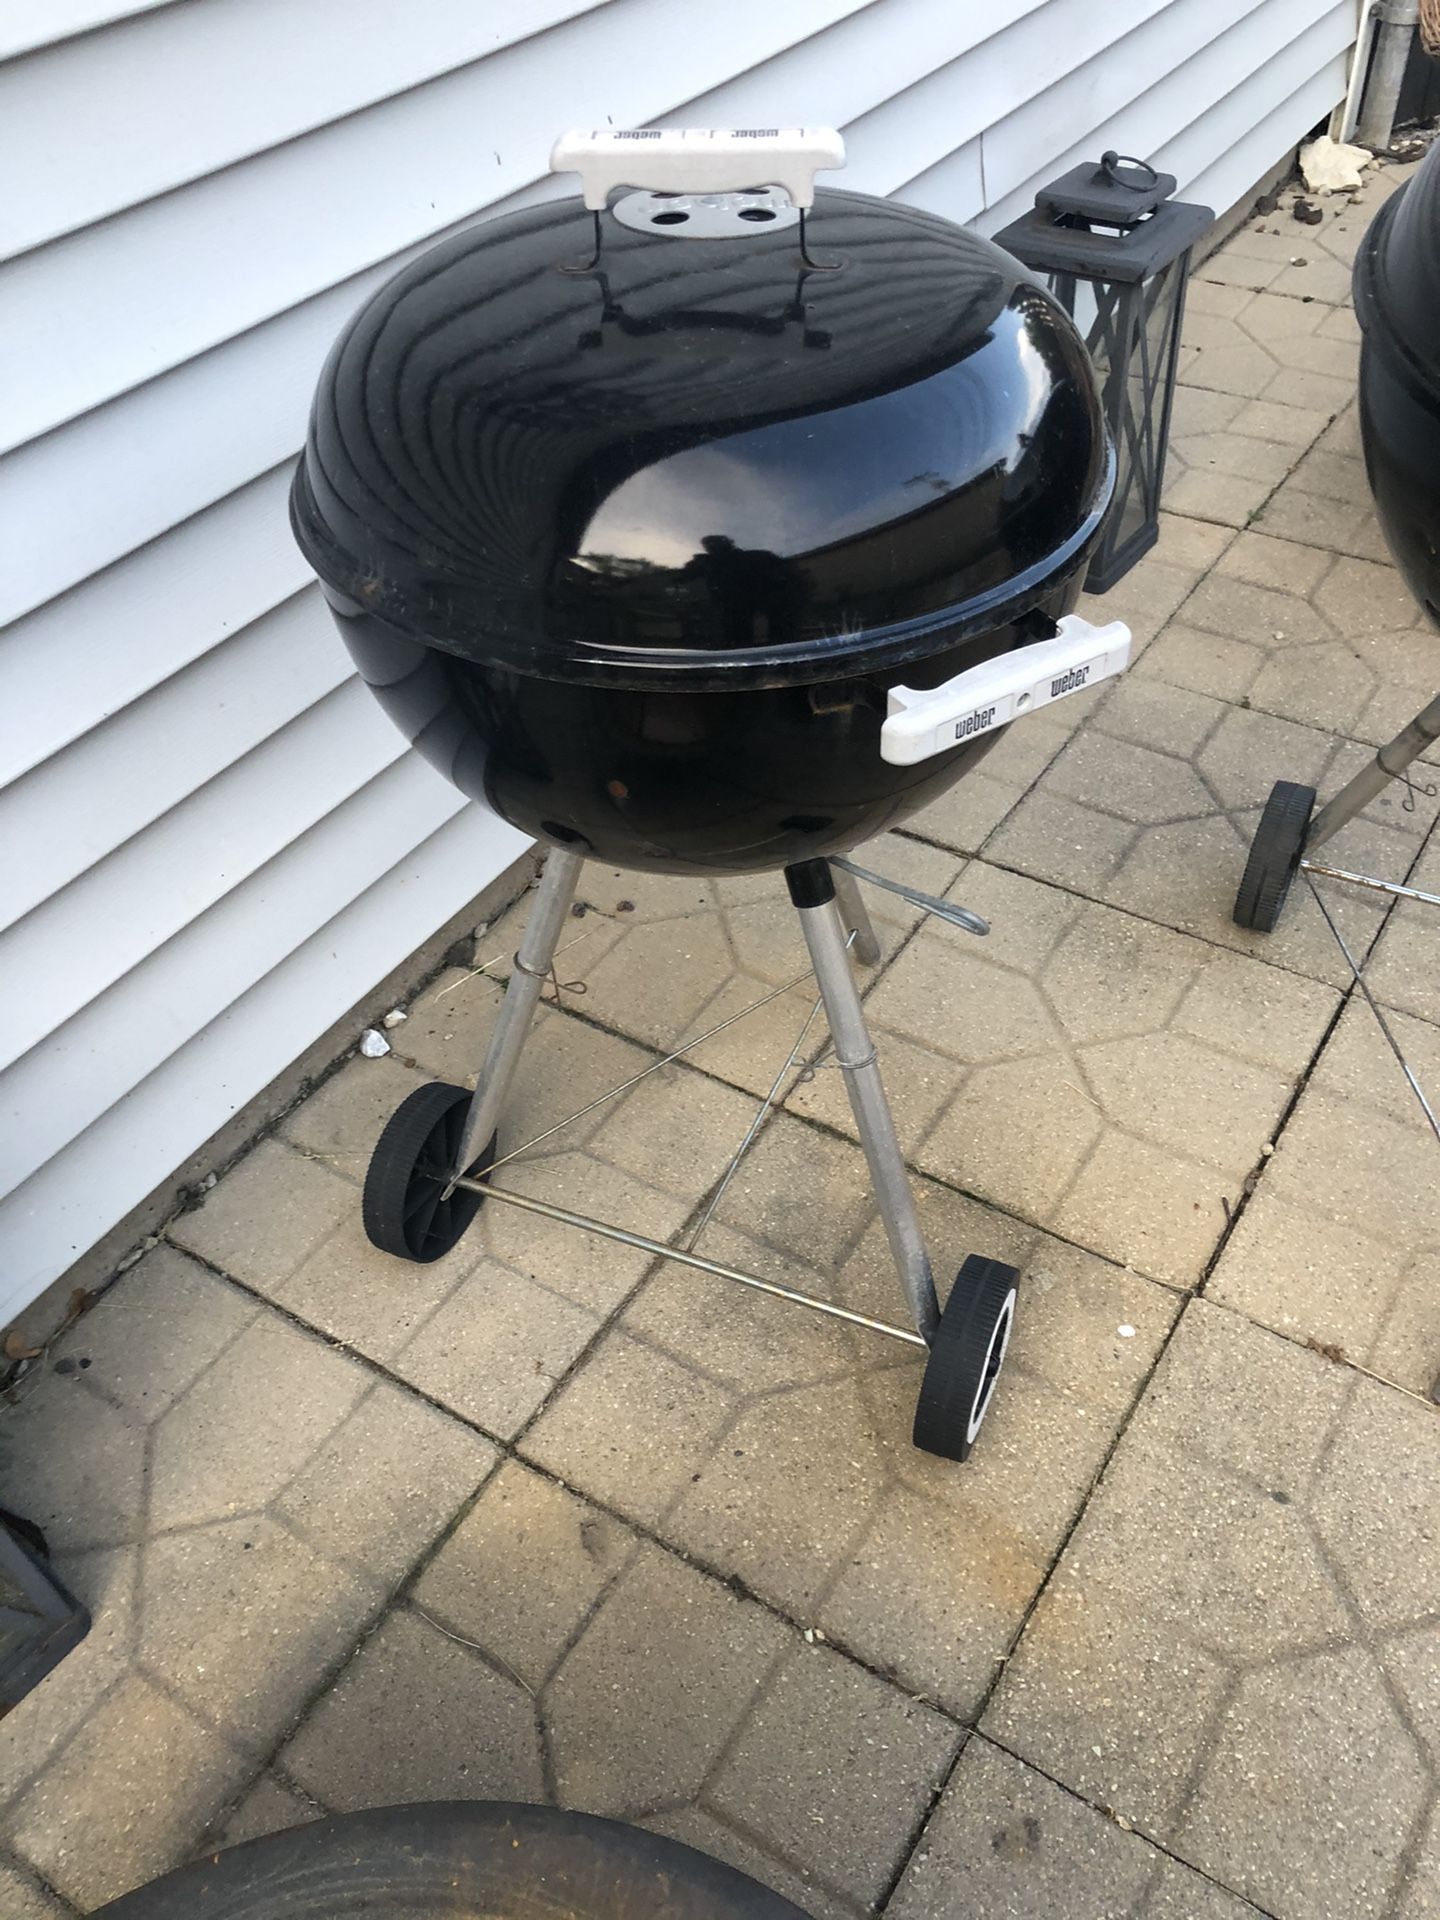 Weber charcoal grill $35